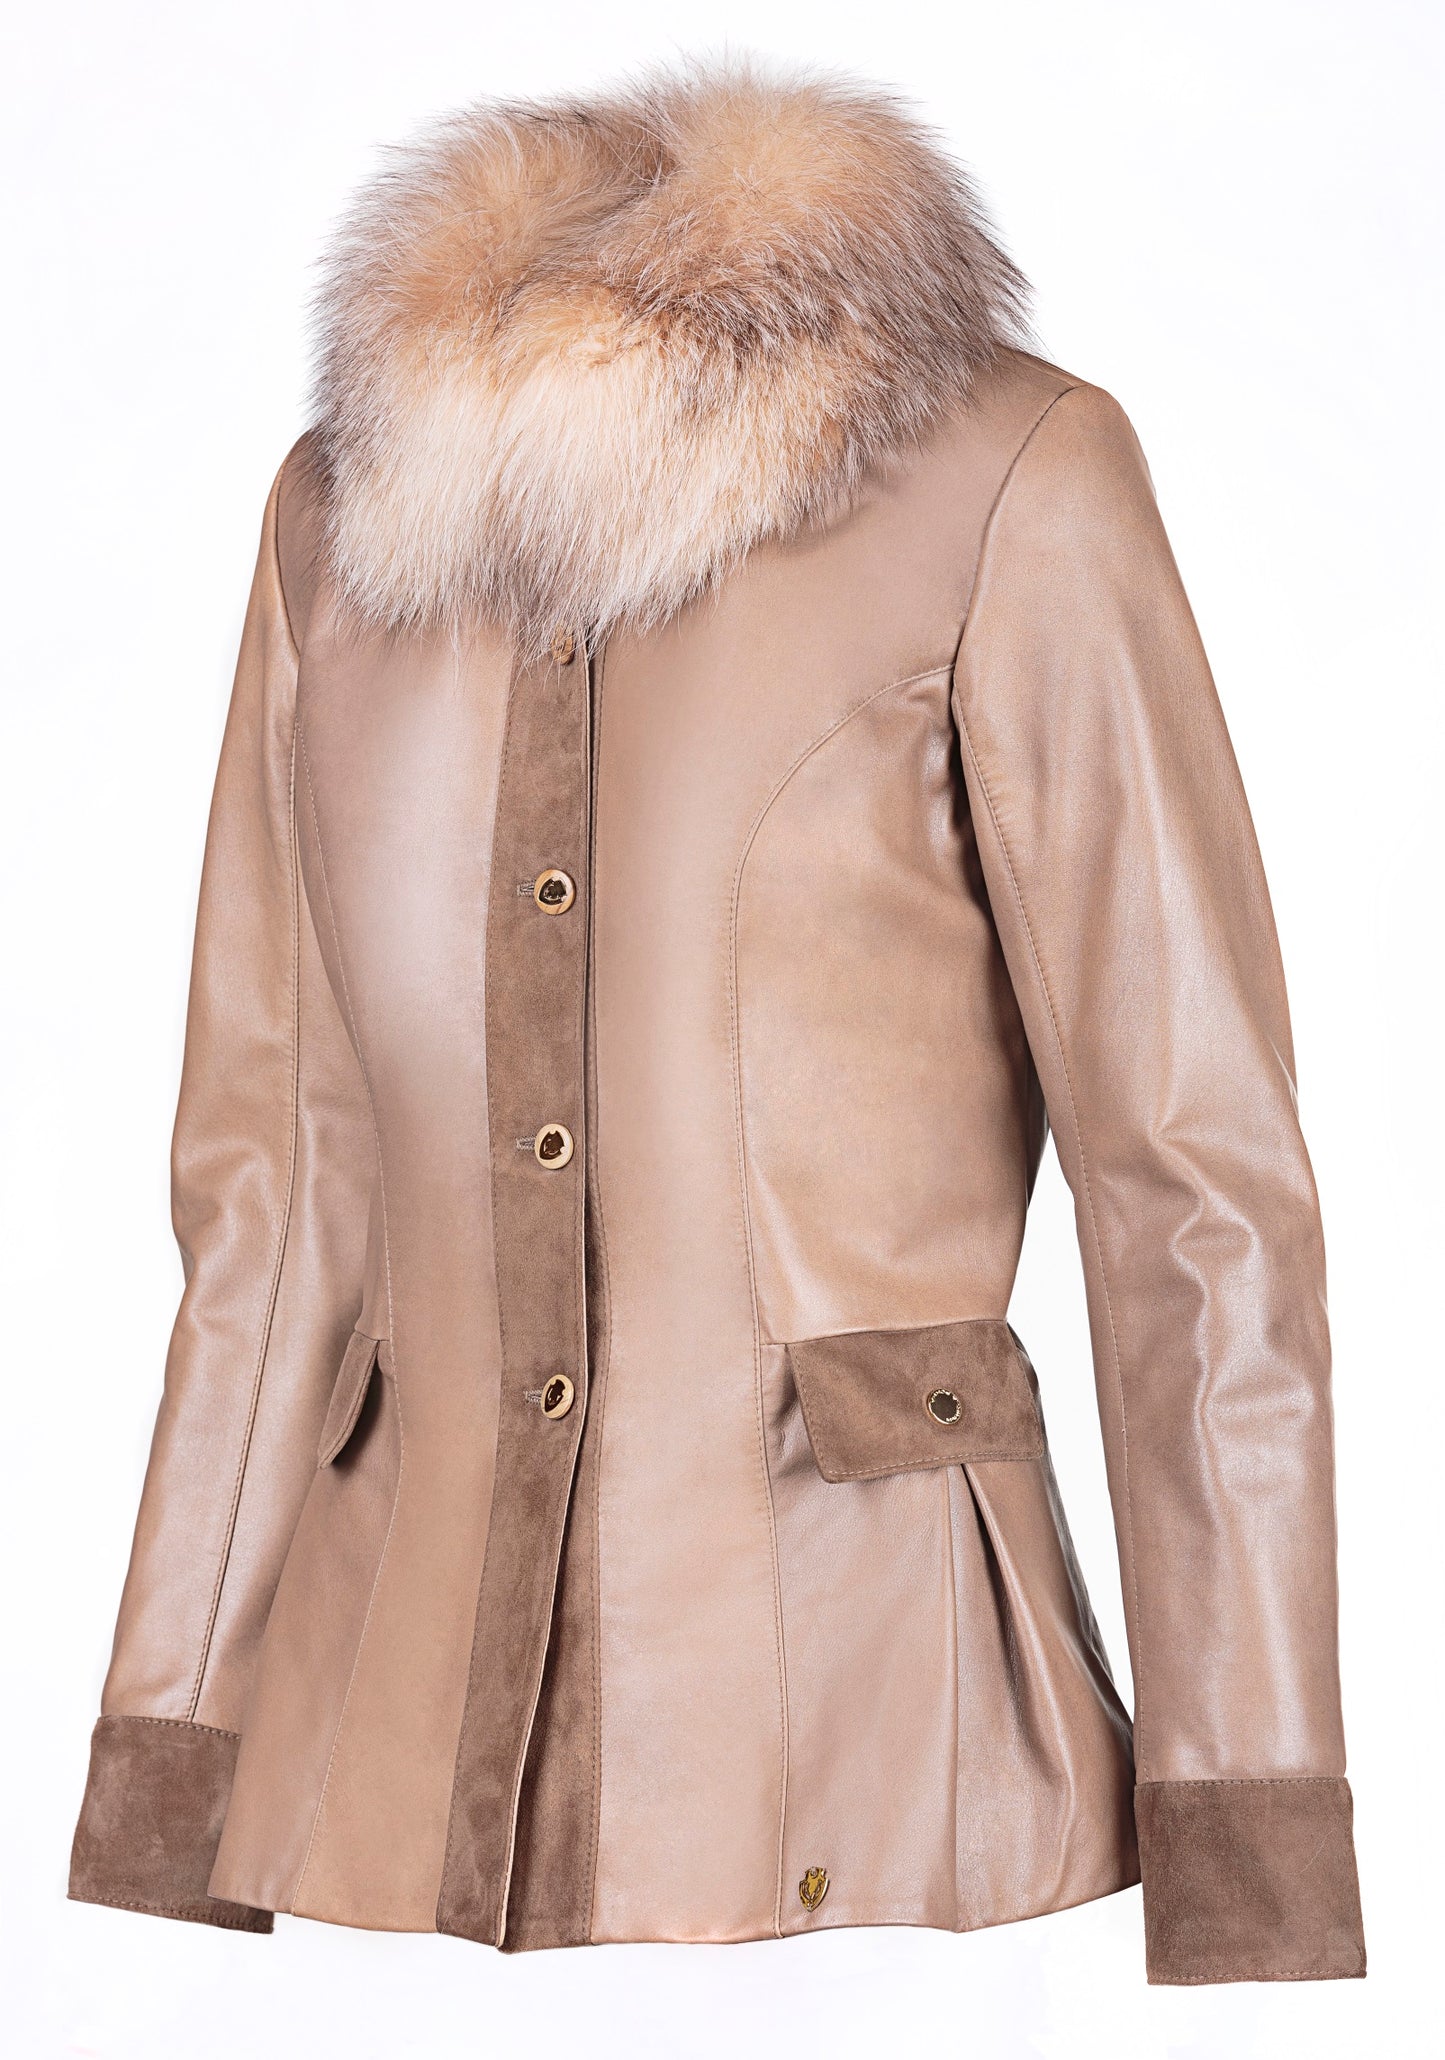 Winter Tailored Suede Reindeer Leather Jacket- Limited Edition